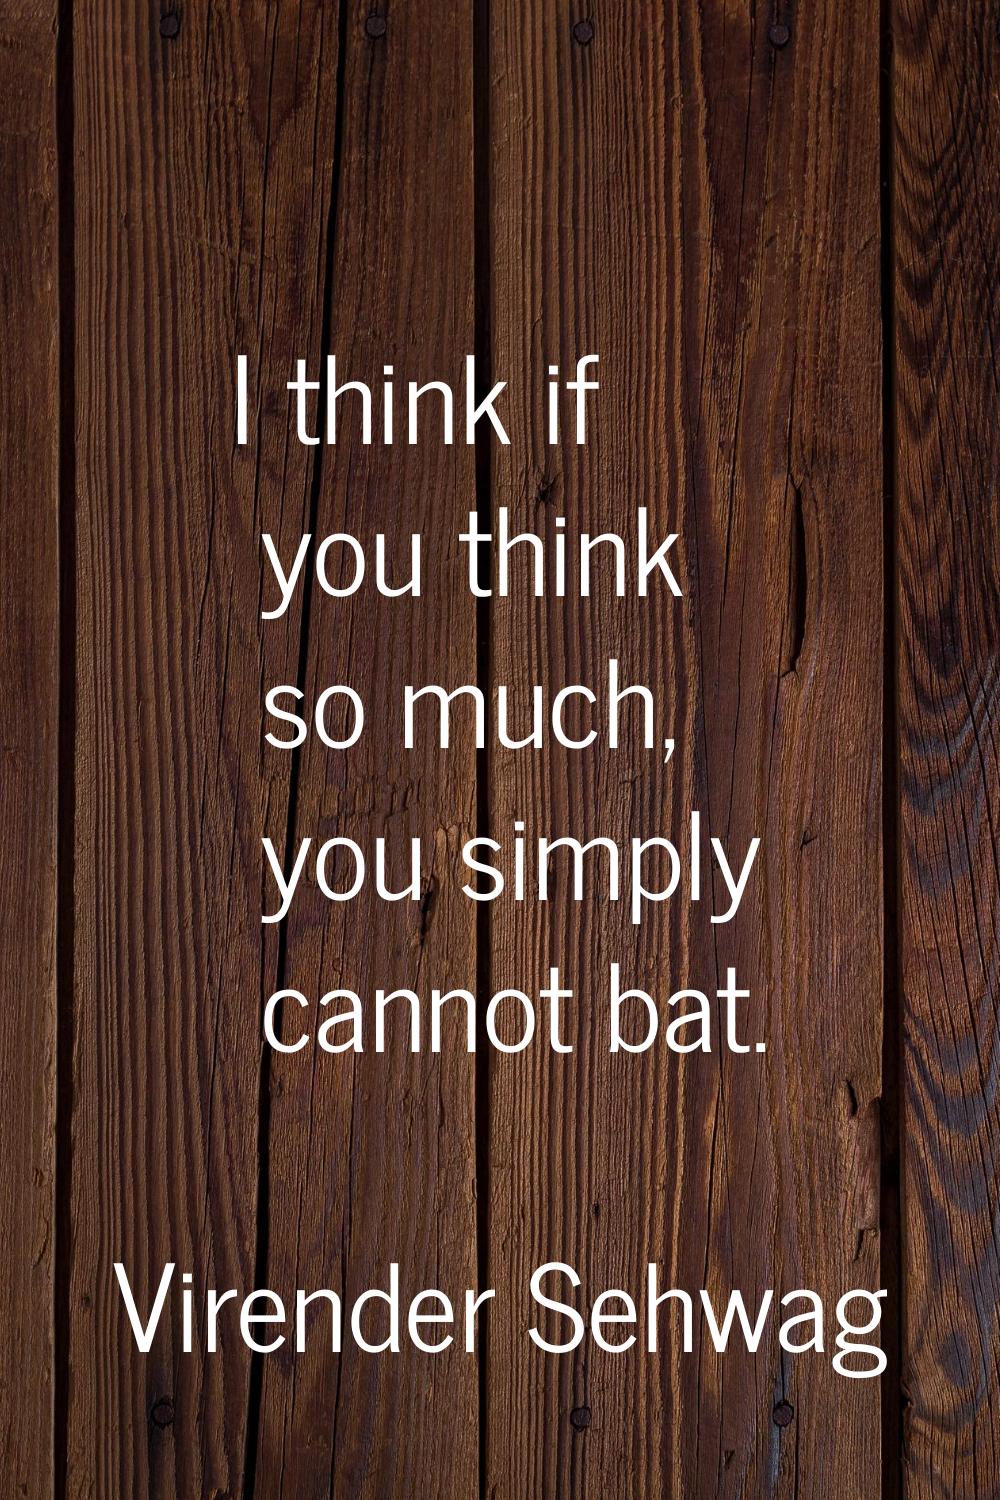 I think if you think so much, you simply cannot bat.